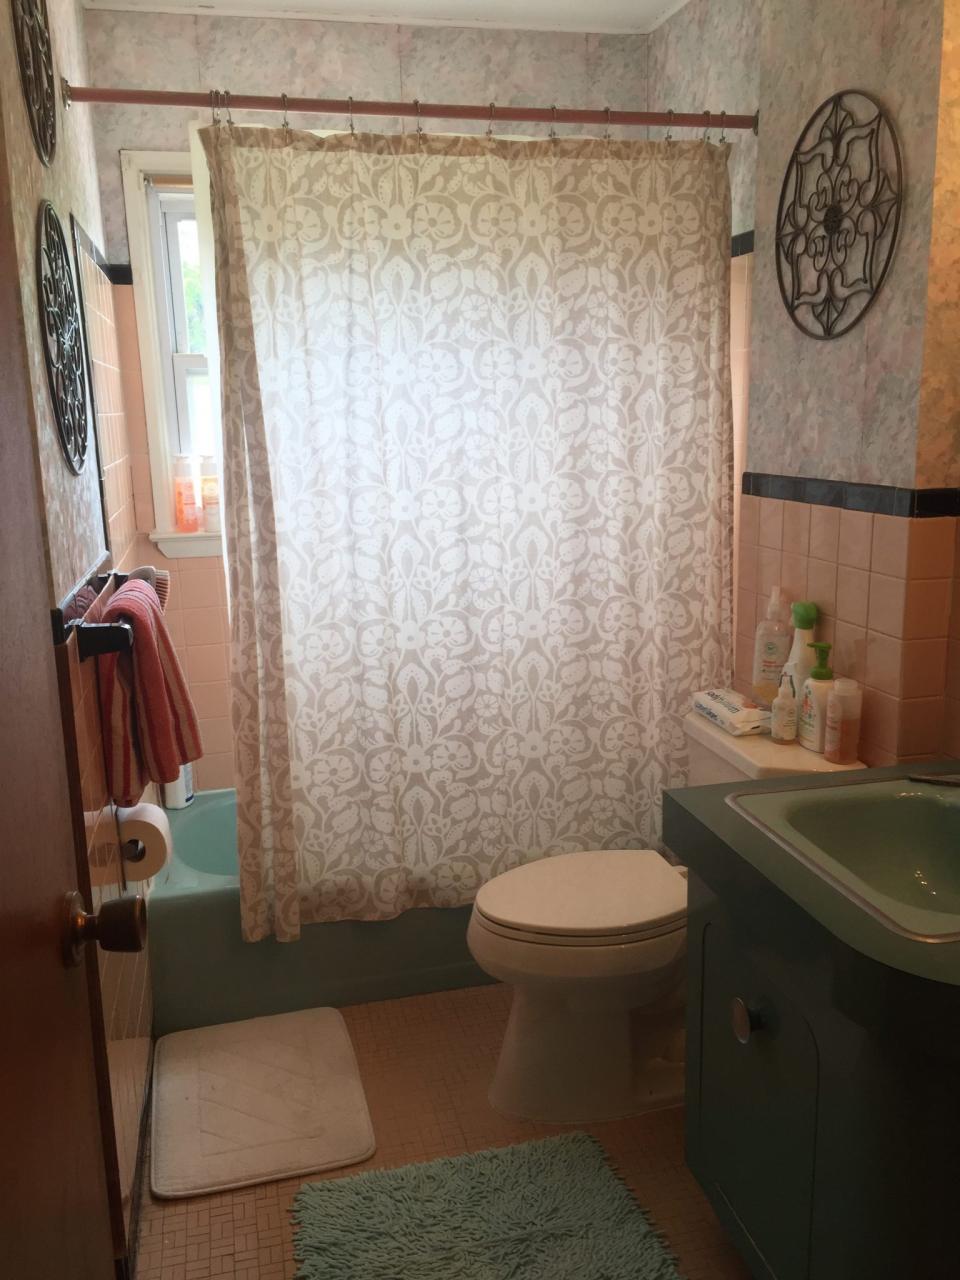 Easy changes to update a retro bathroom without a remodel. Effortless